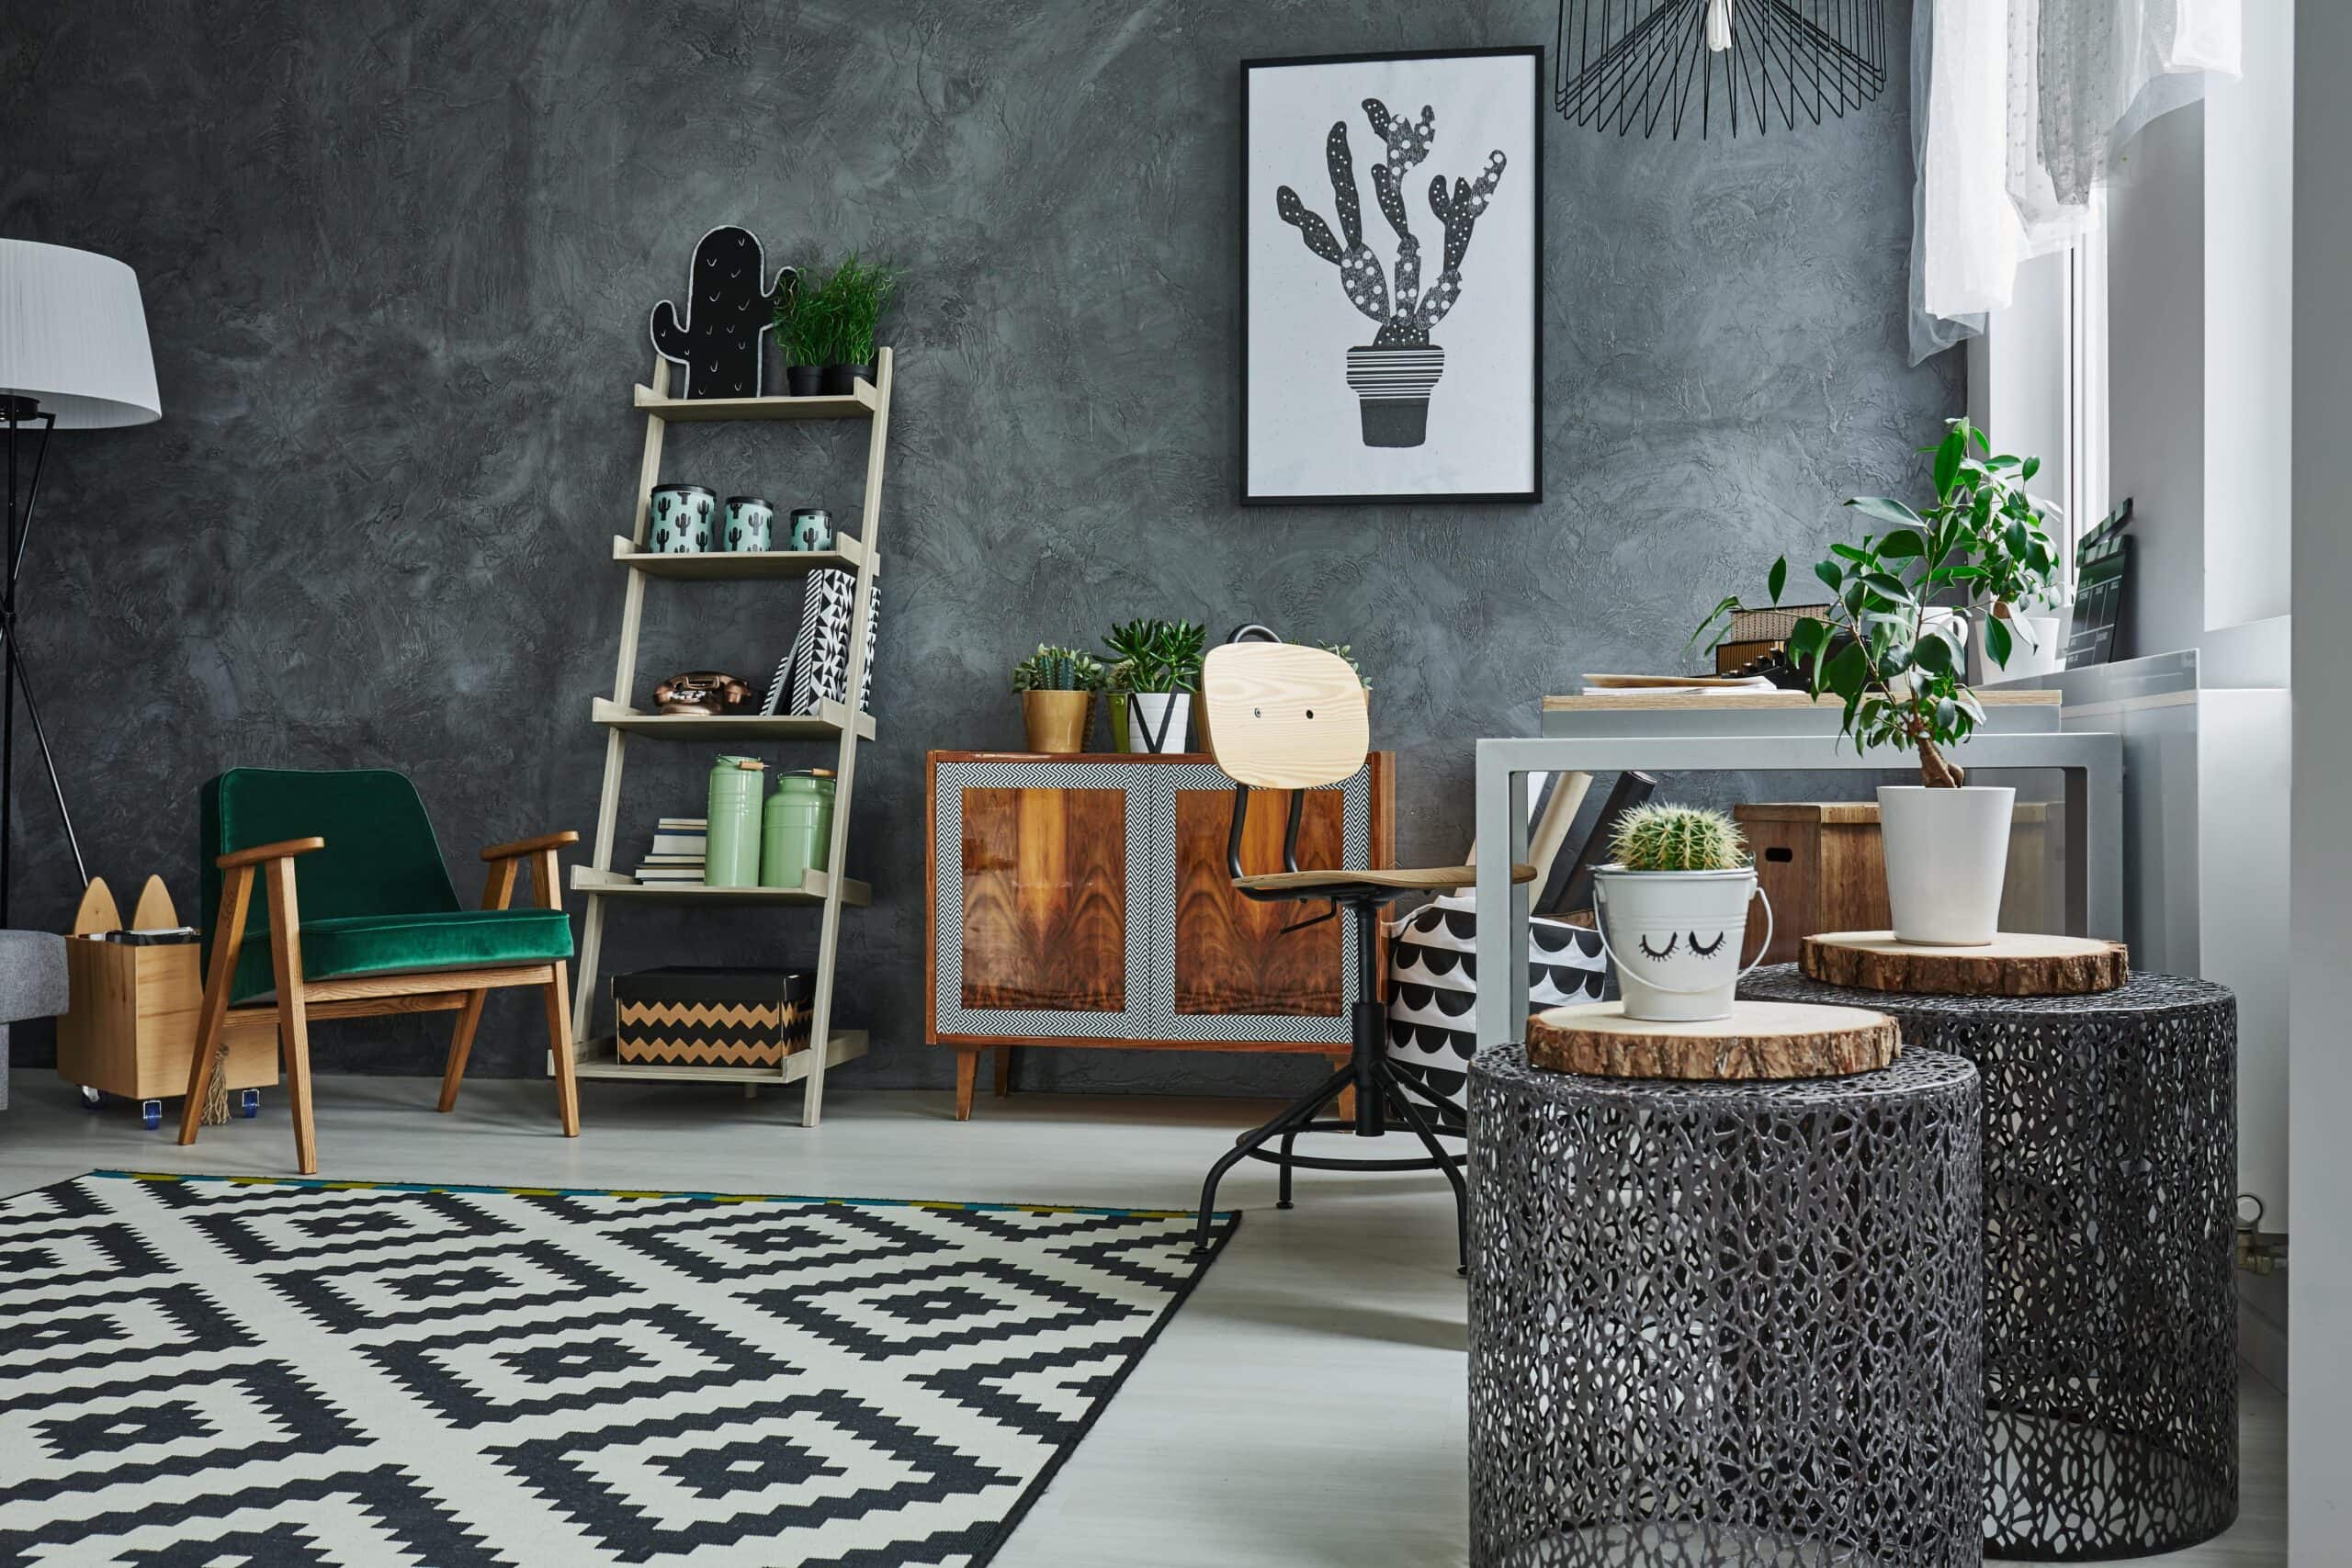 5 Top Home Decor Trends For 2021 | The Decor Journal India